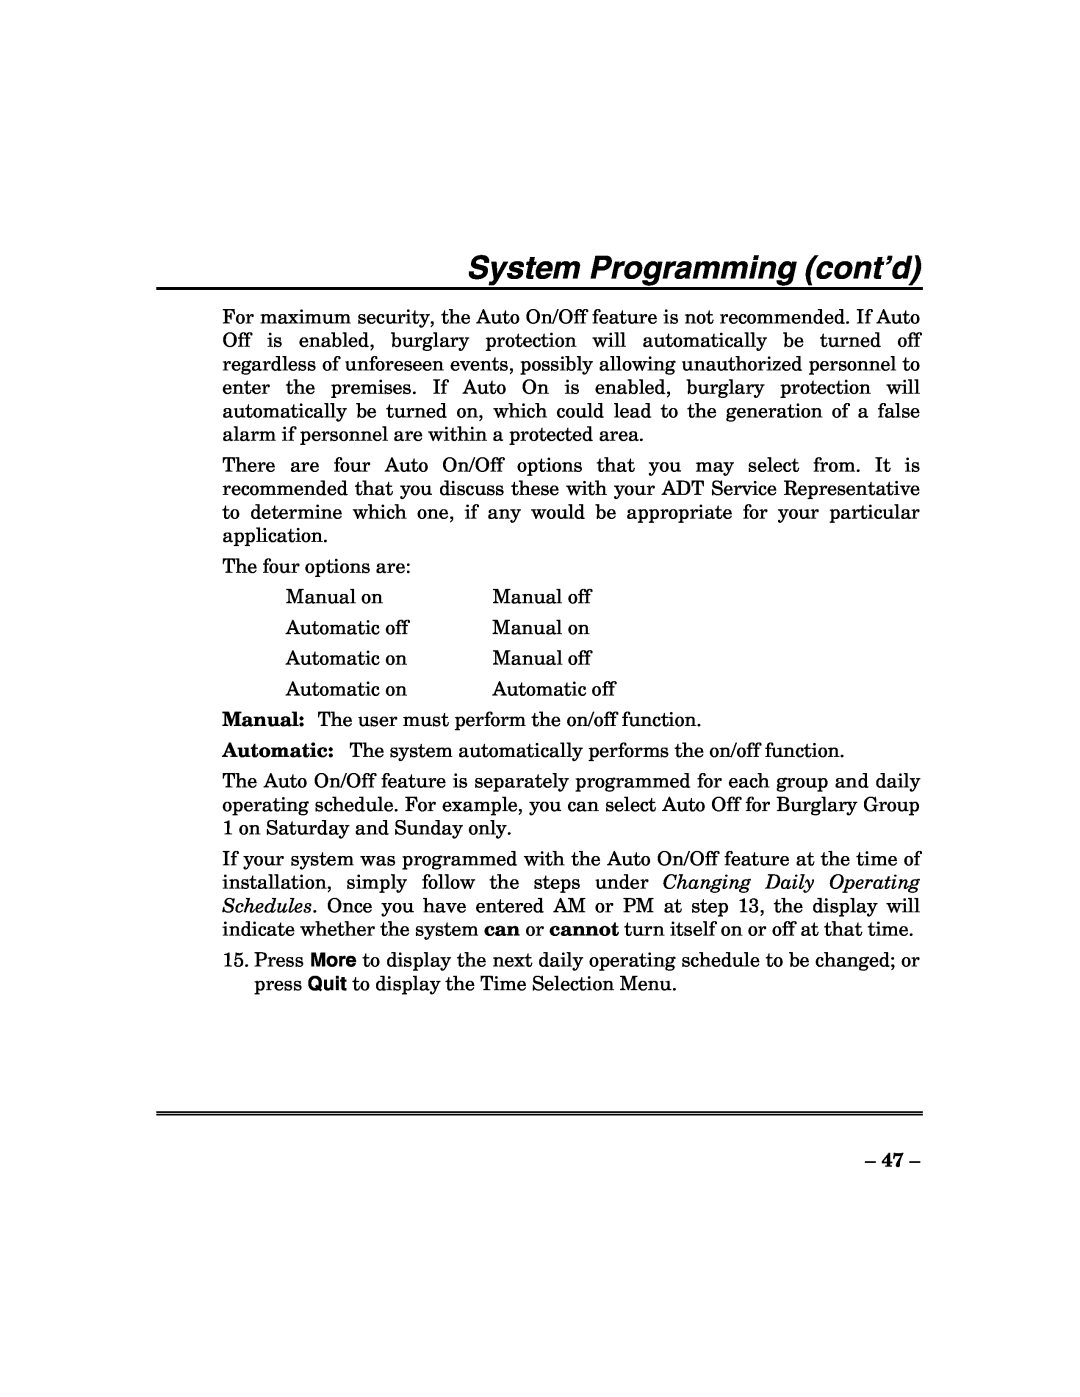 ADT Security Services 200 Plus manual System Programming cont’d, The four options are 